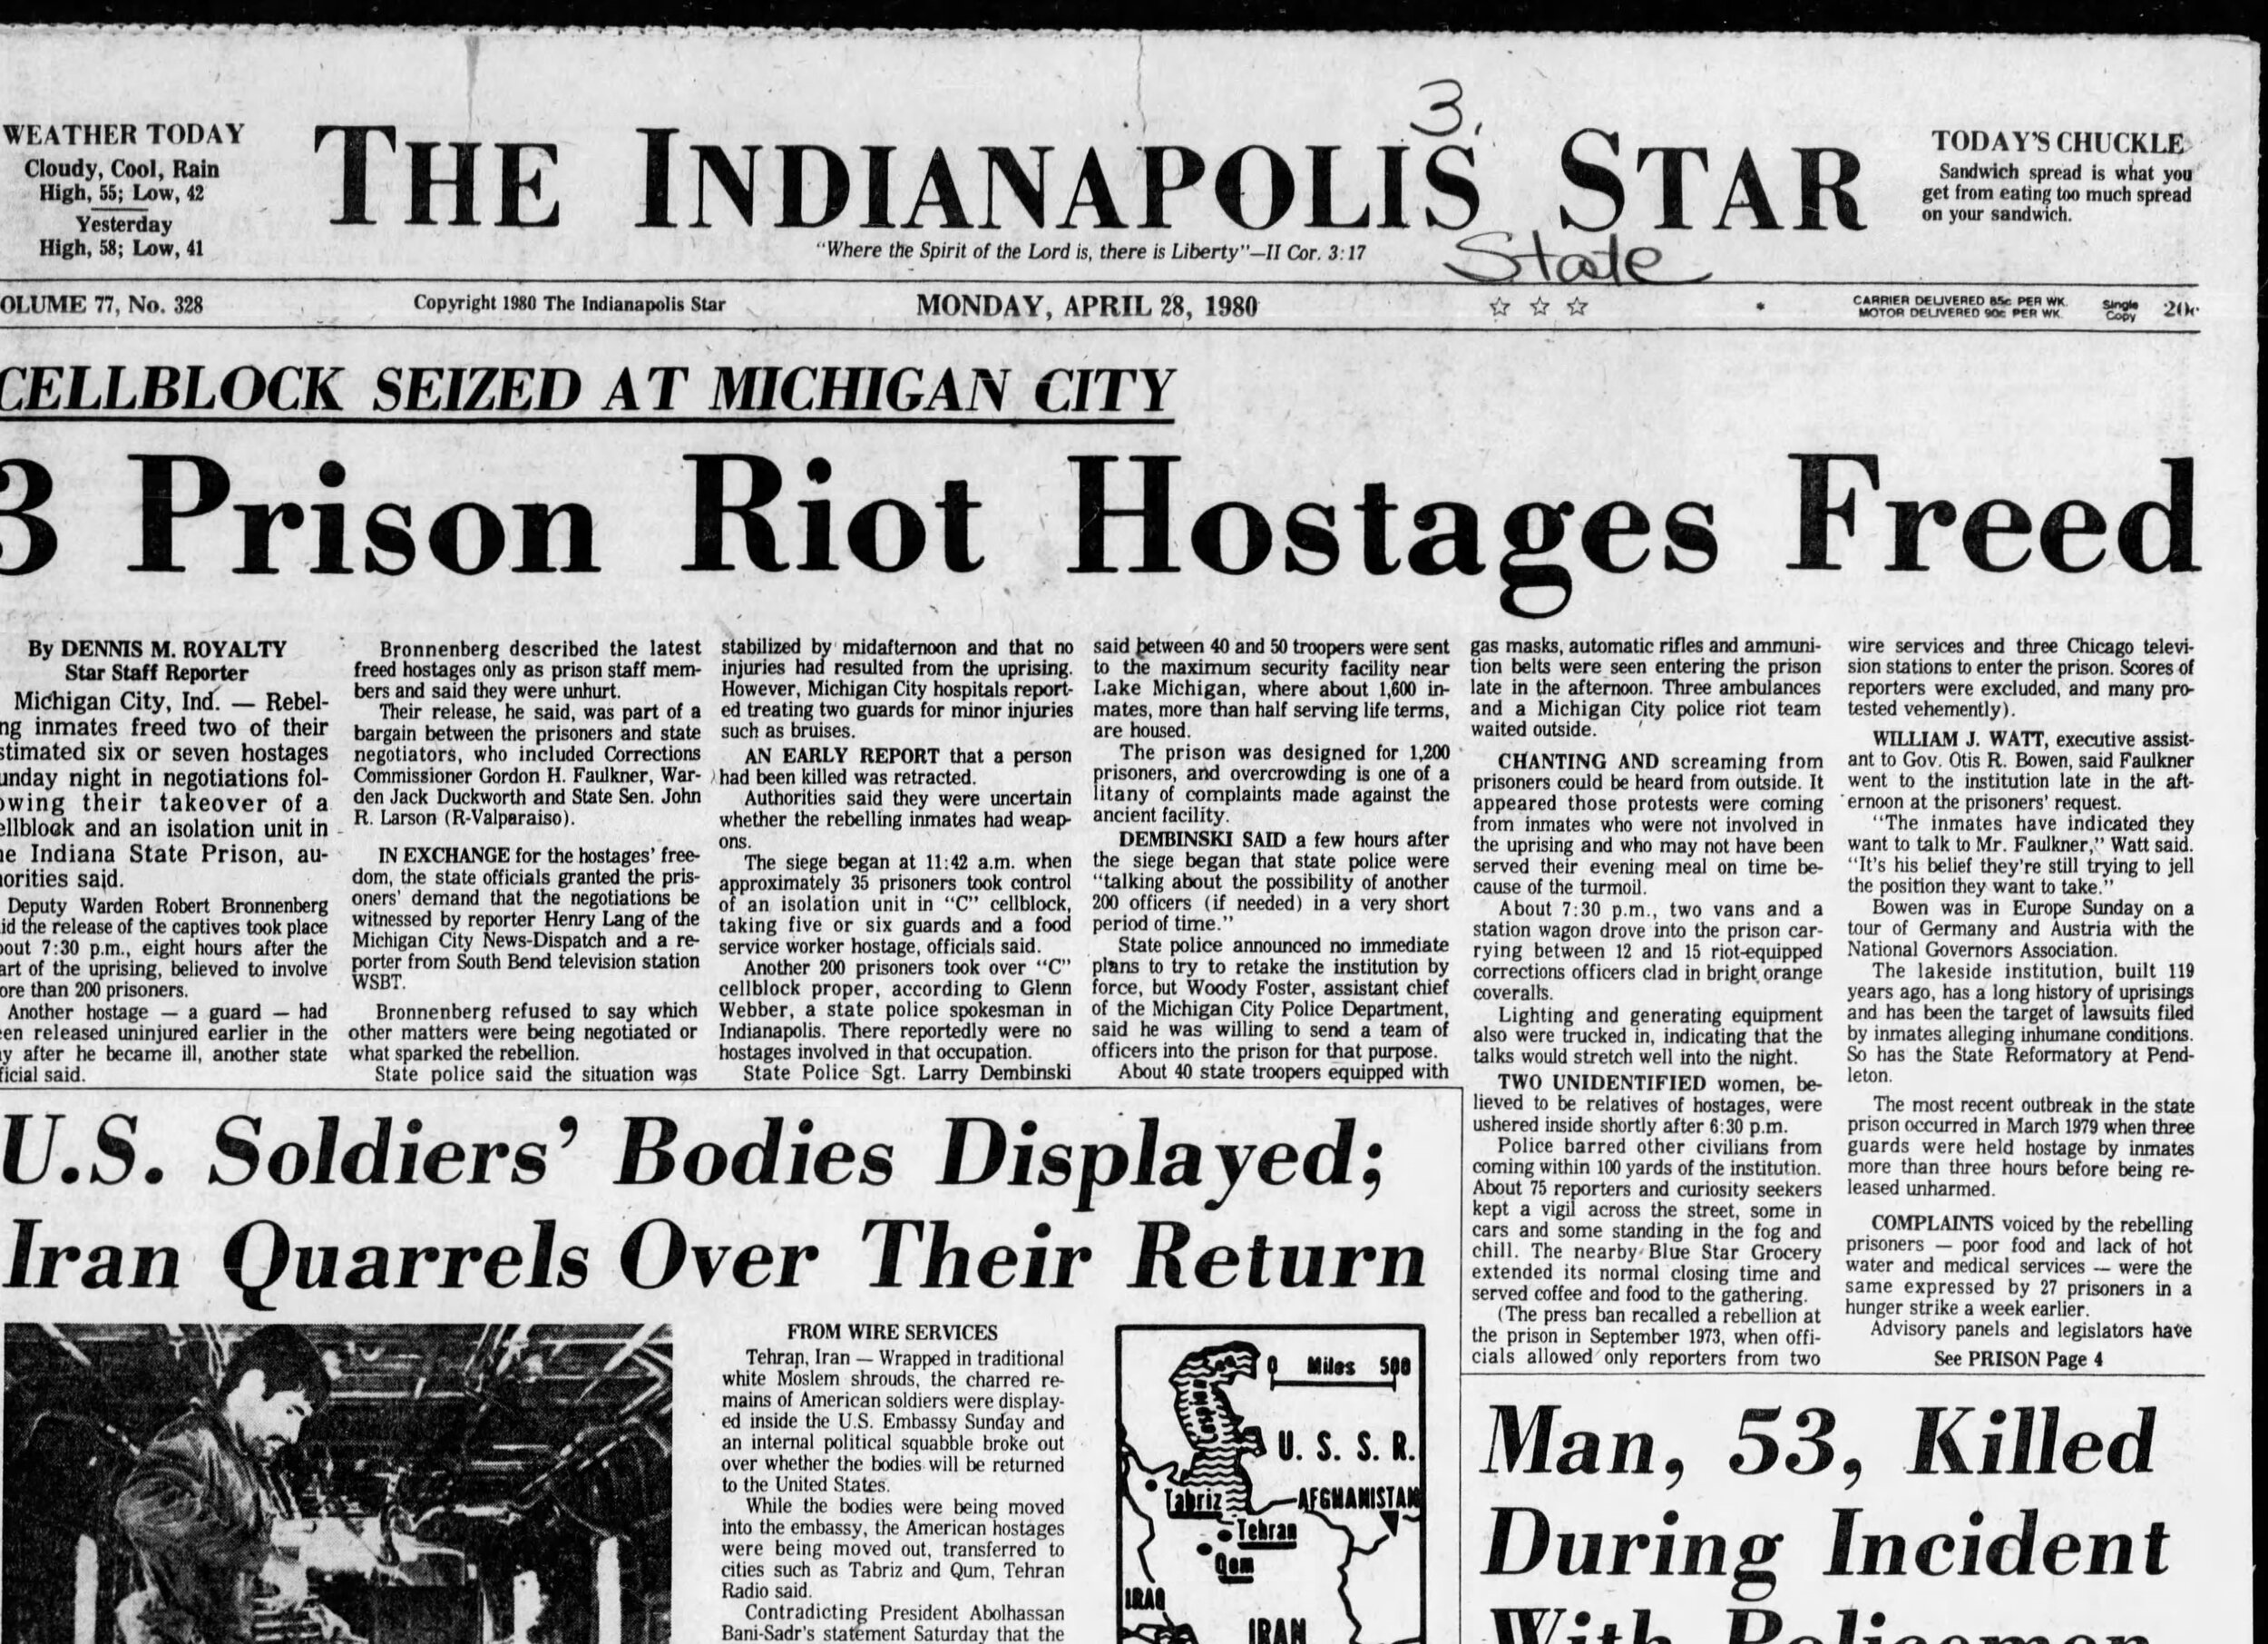 The_Indianapolis_Star_Mon__Apr_28__1980_1.jpg